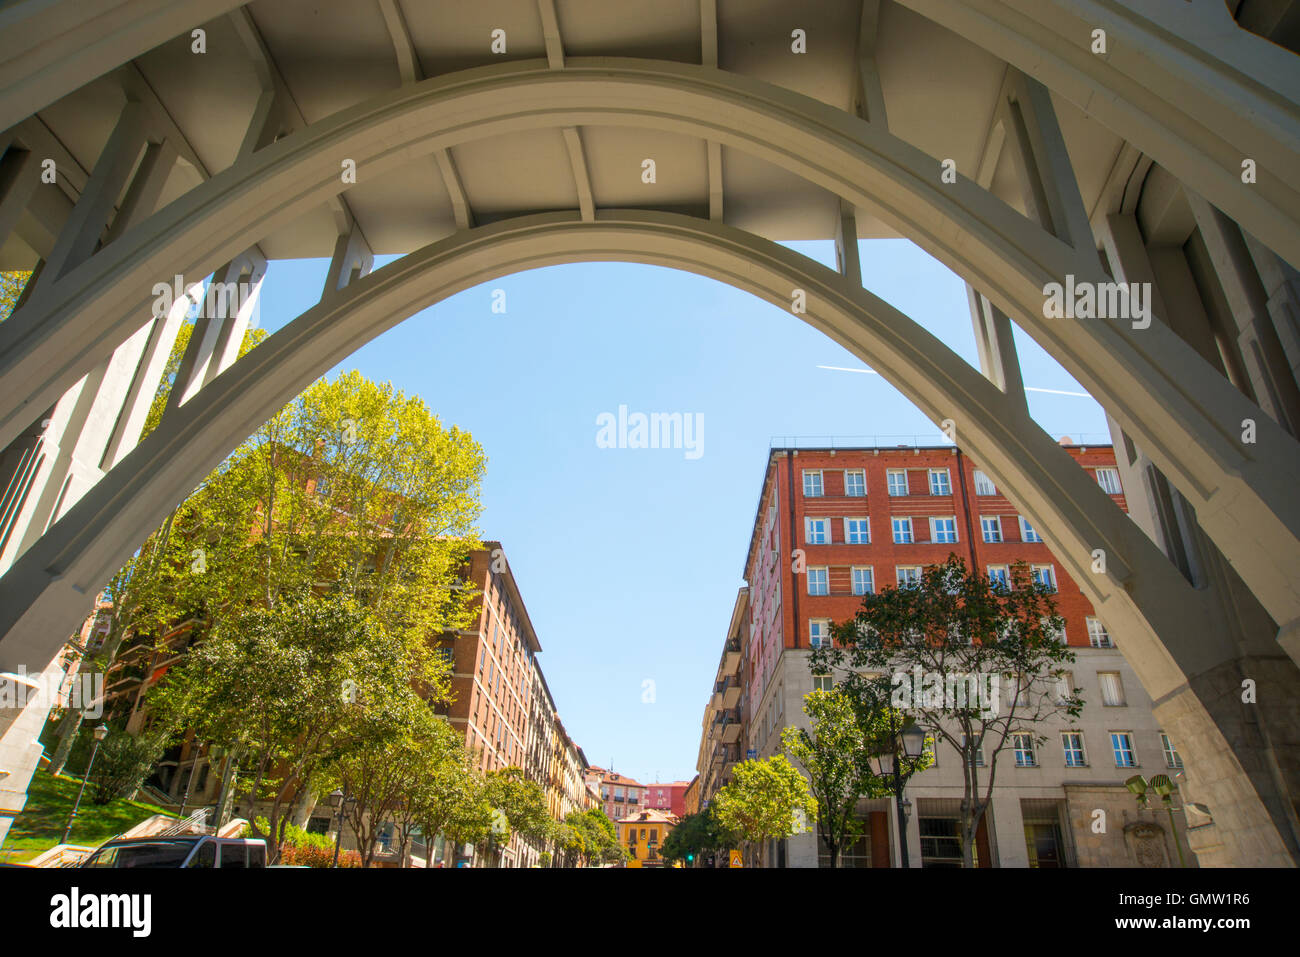 Segovia street viewed from under the Viaduct. Madrid, Spain. Stock Photo